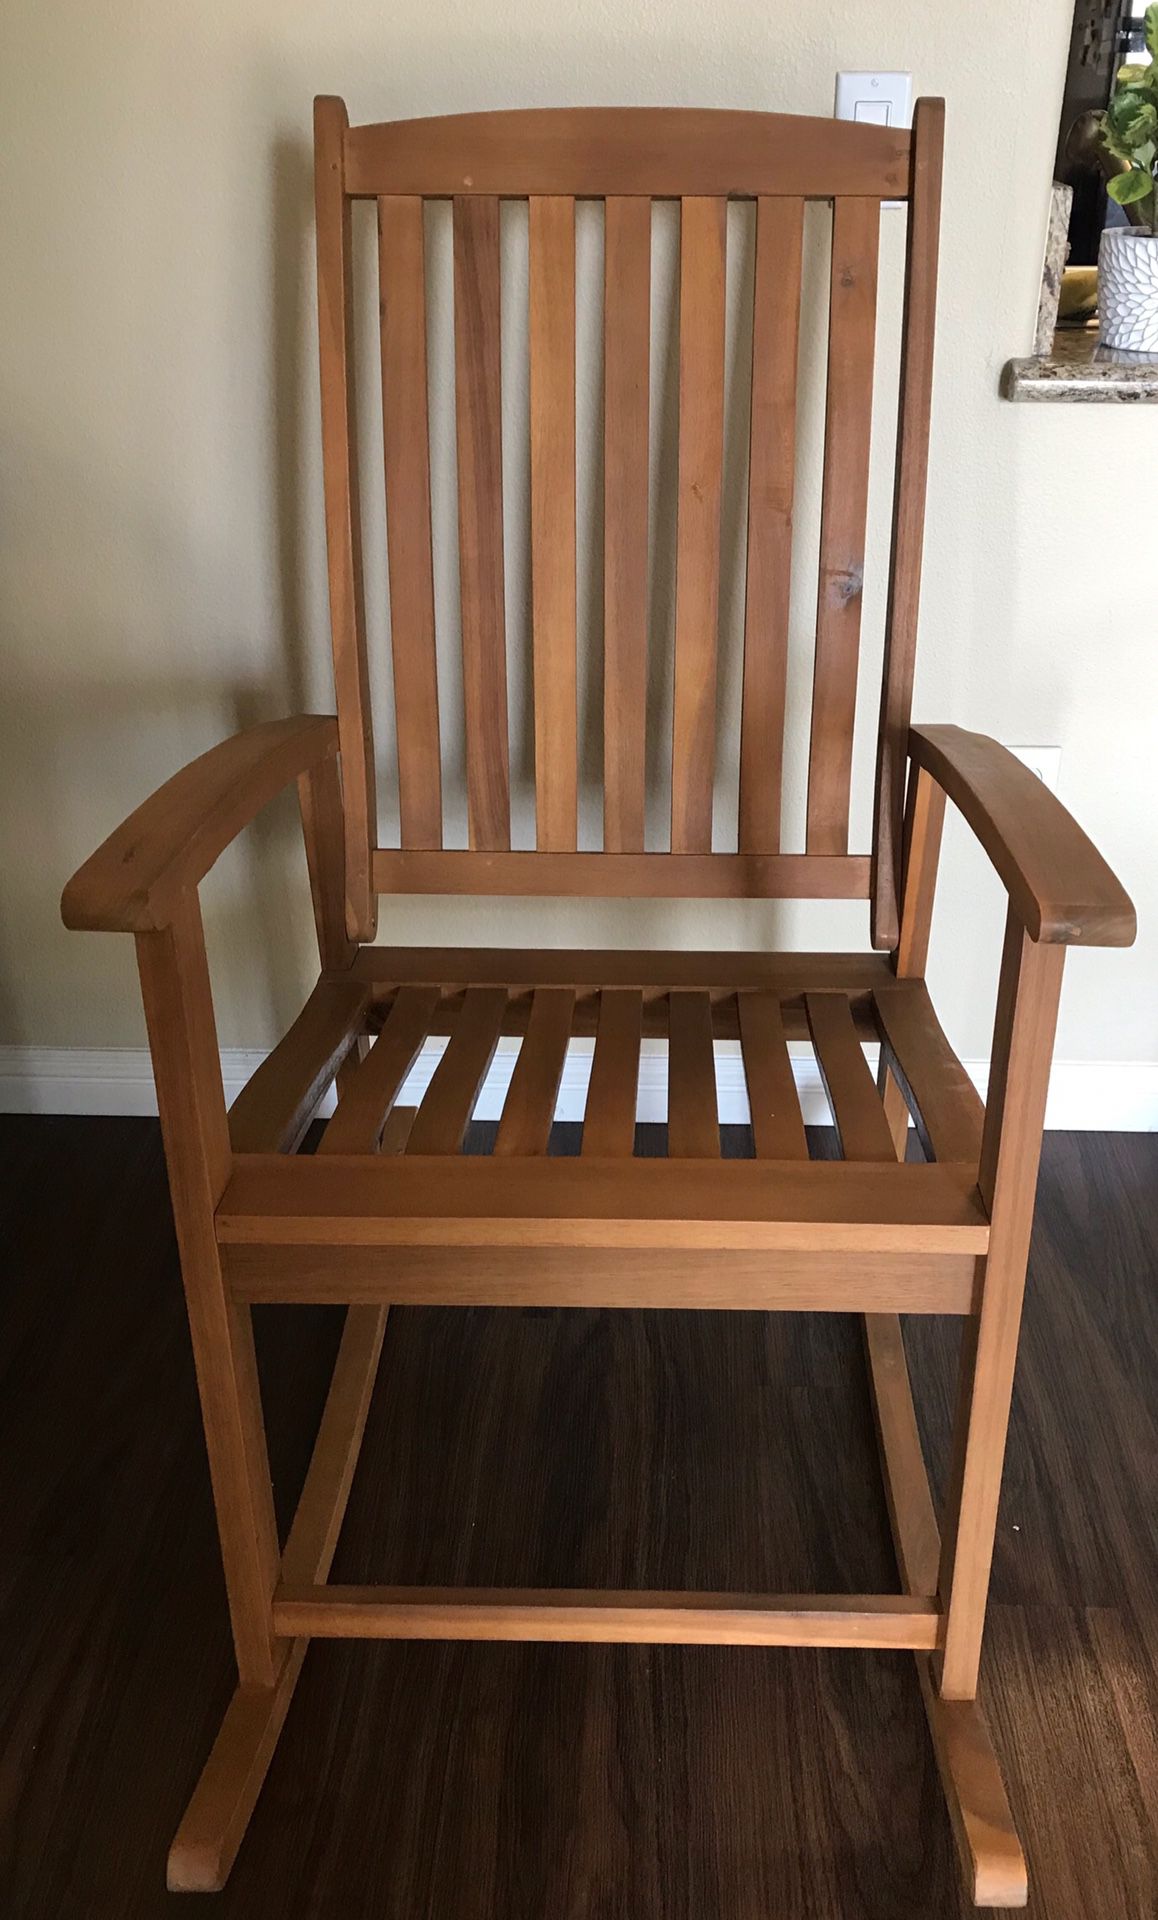 New Wooden Rocking Chair